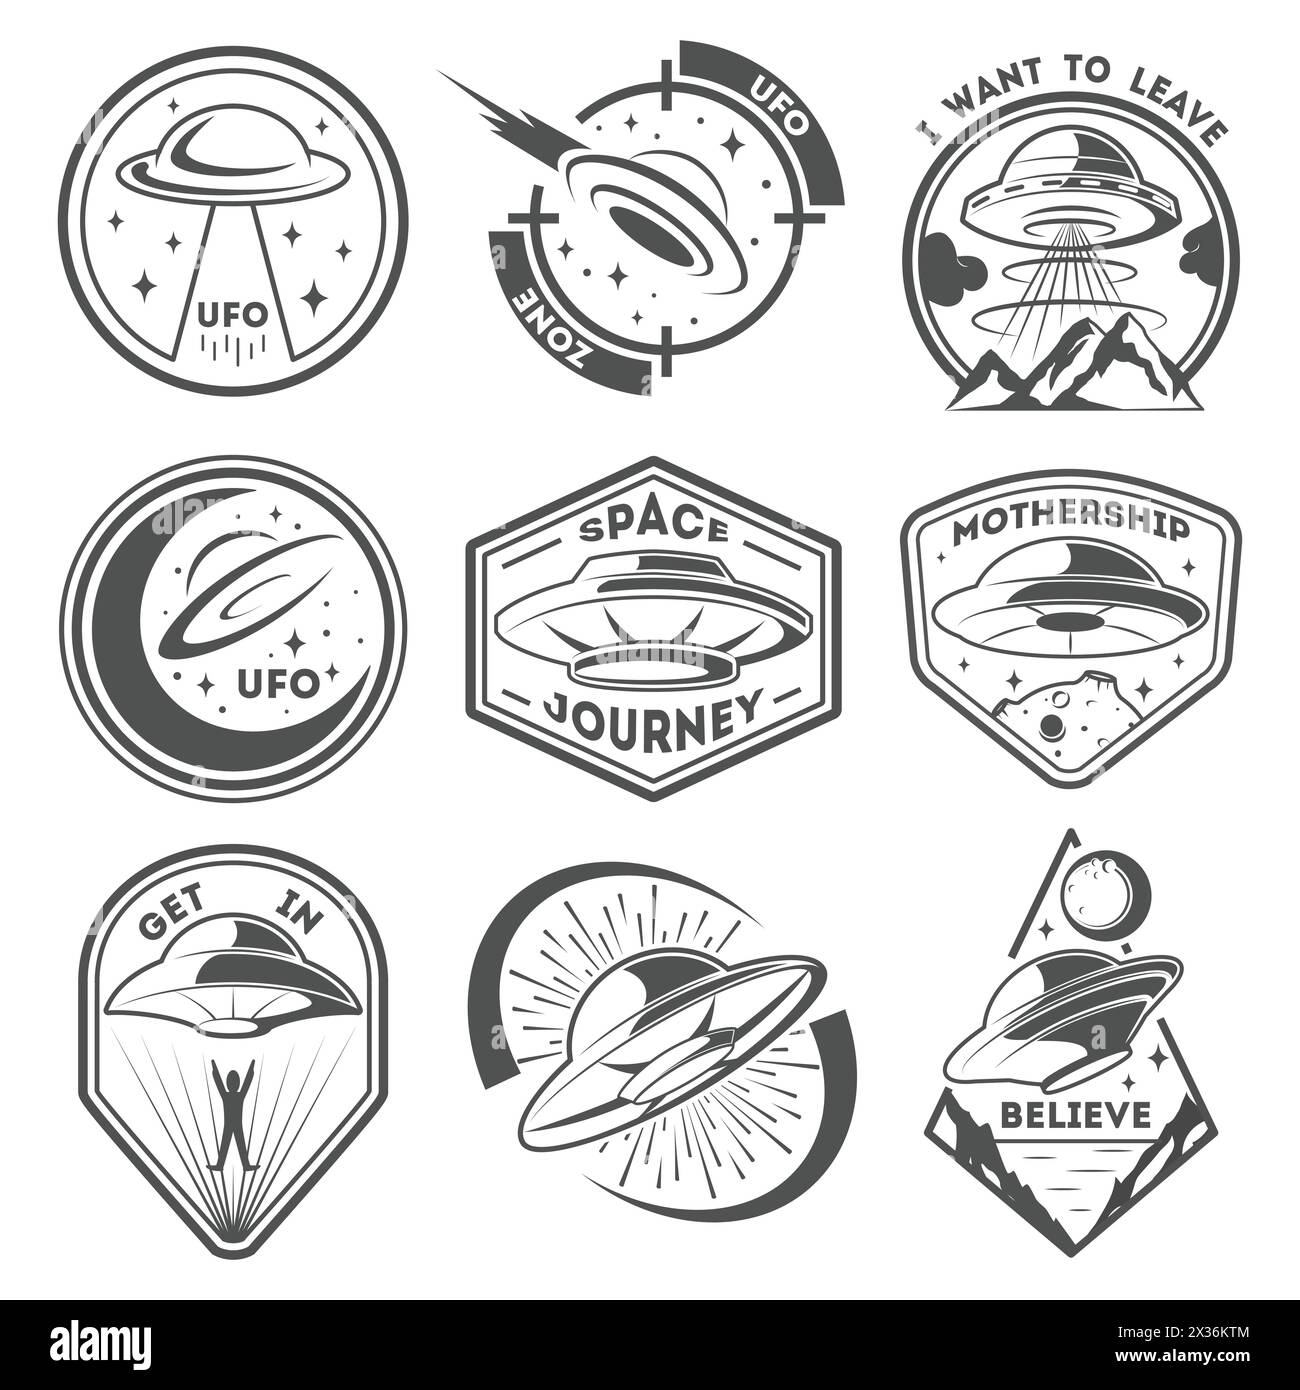 Alien spaceship, spacecrafts and ufo emblems set. Cosmic ship in form saucer for transportation. Monochrome UFO badges vector set Stock Vector